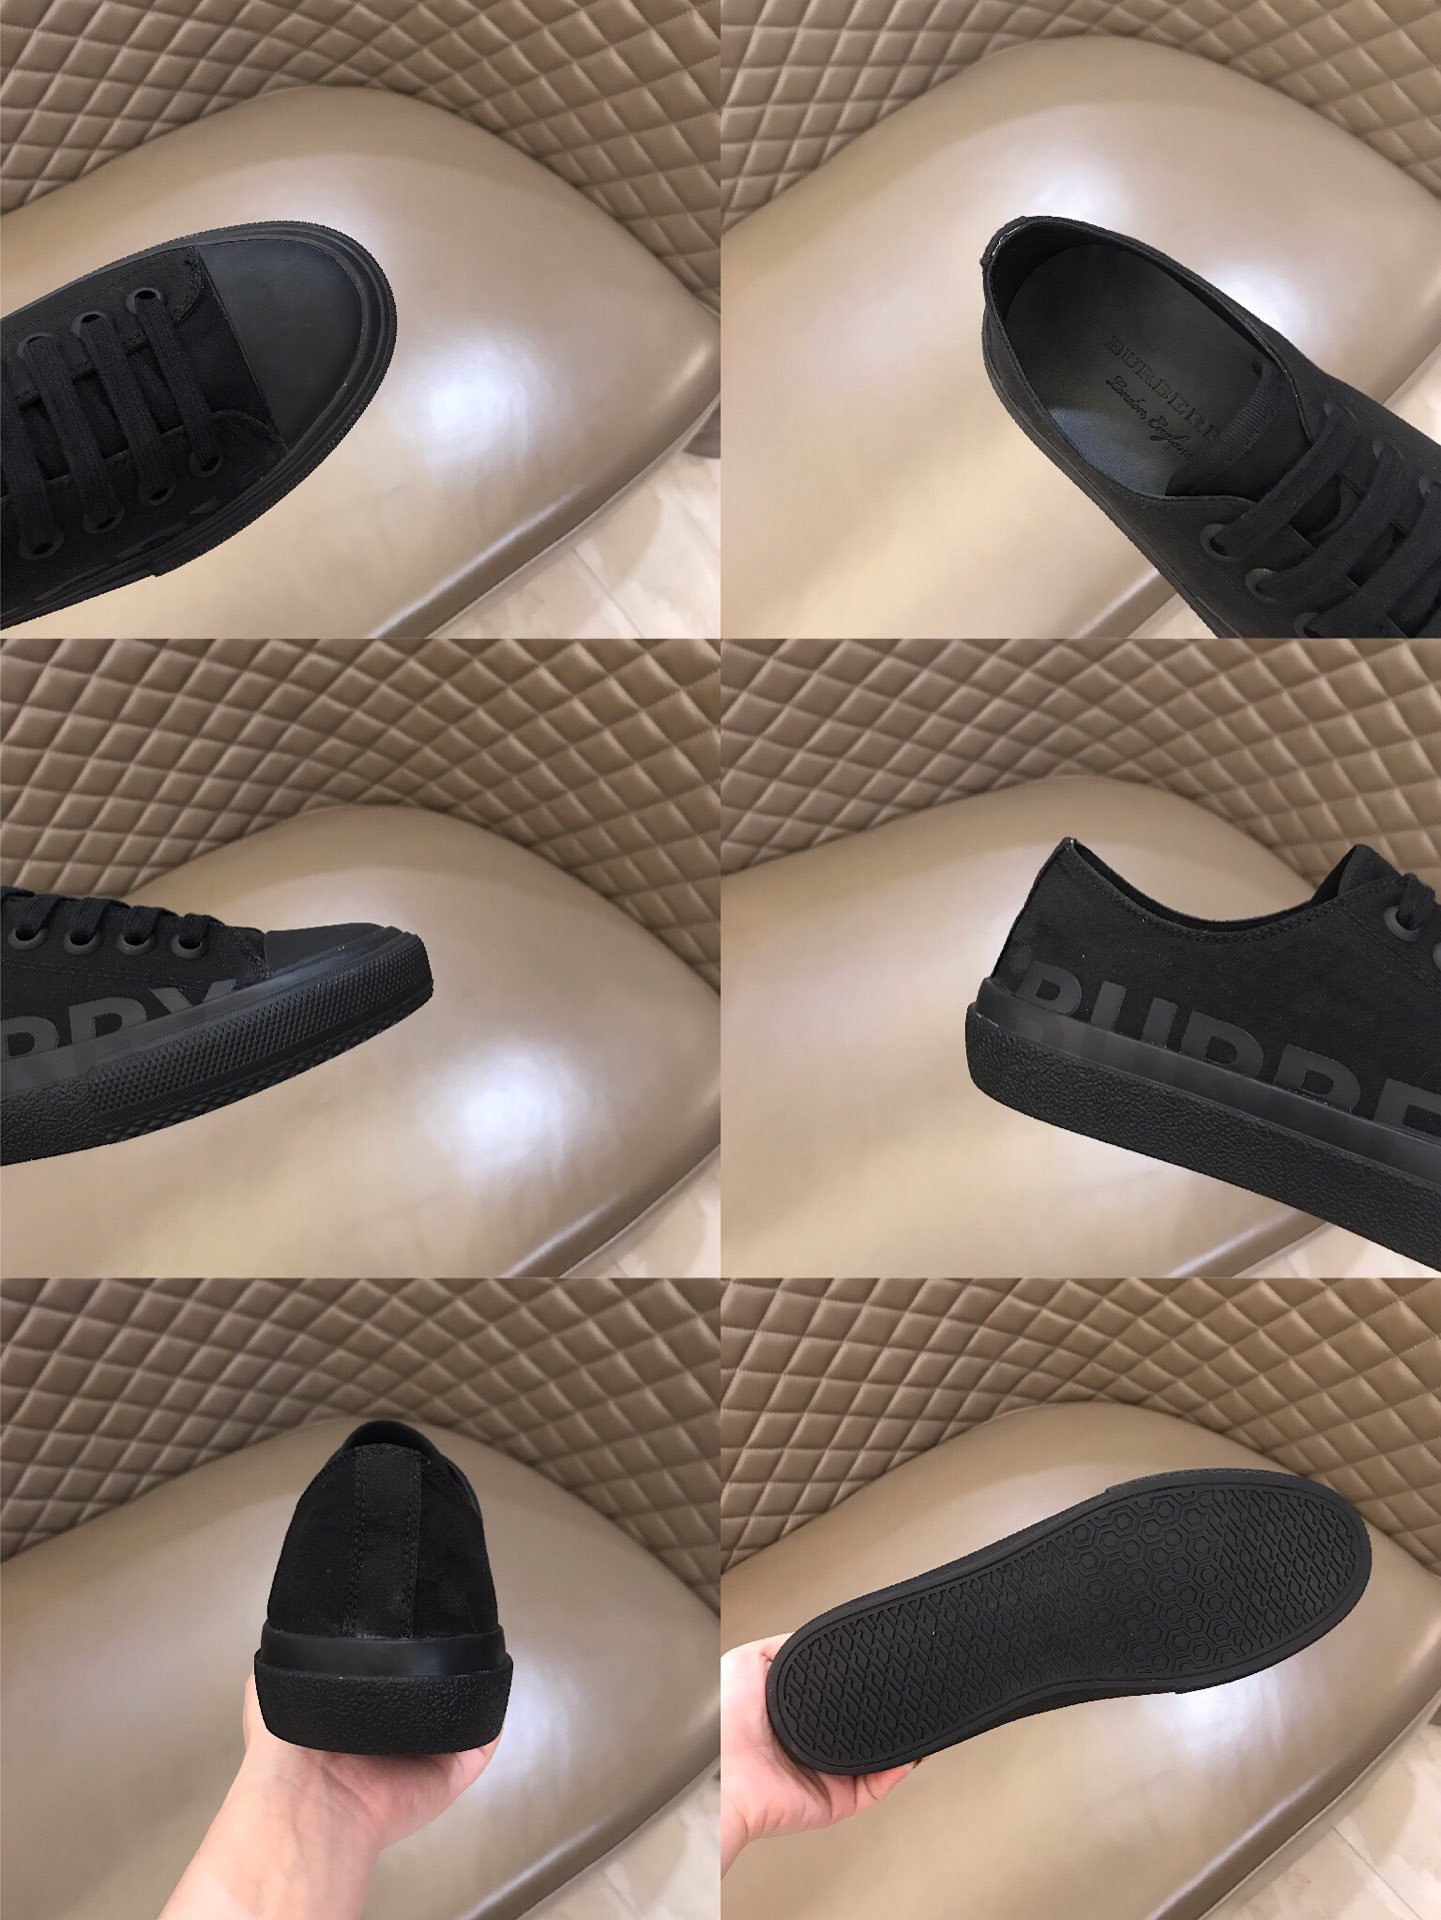 Burberry Low-top High Quality Sneakers Black and Black rubber sole MS021130